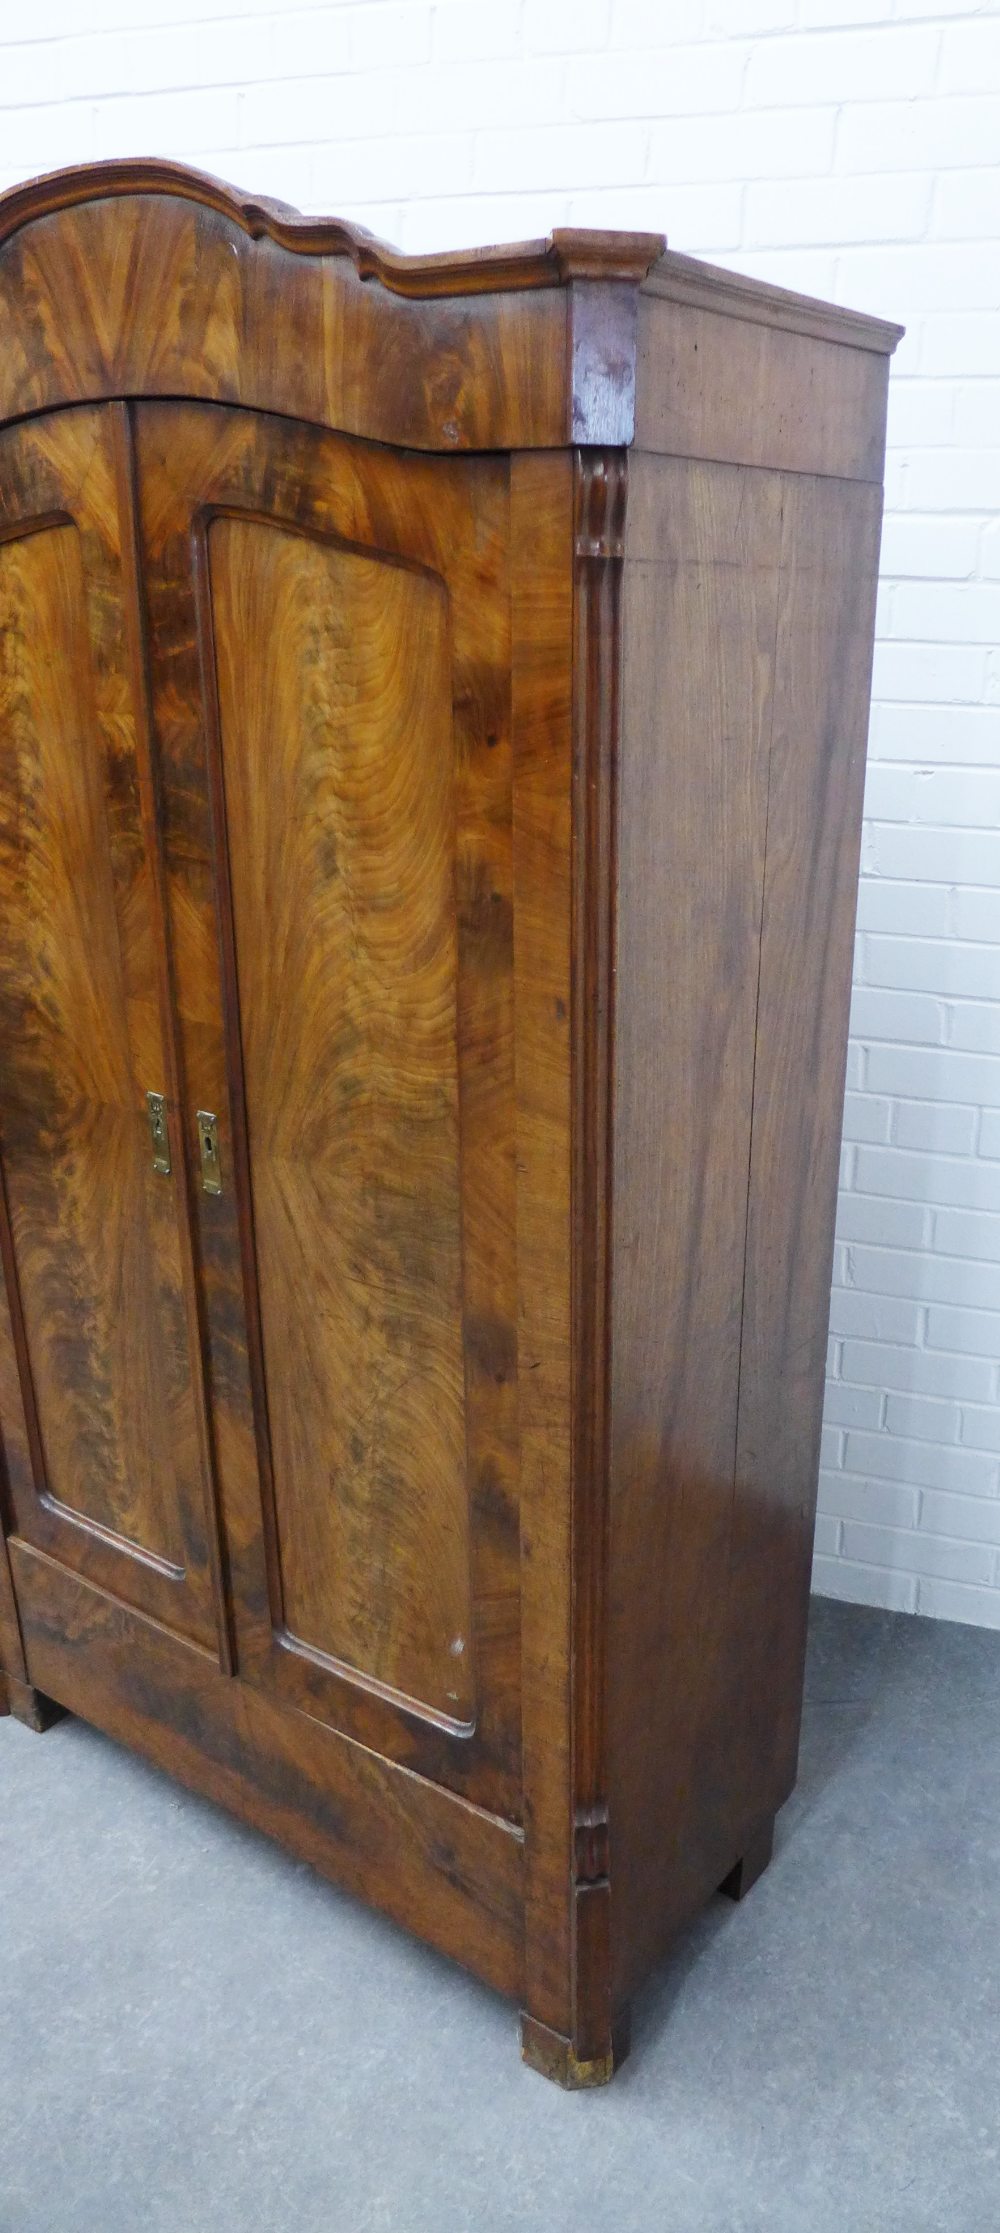 Late 19th / early 20th century flame mahogany, two door wardrobe of neat proportions, 182 x 109 x - Image 2 of 4